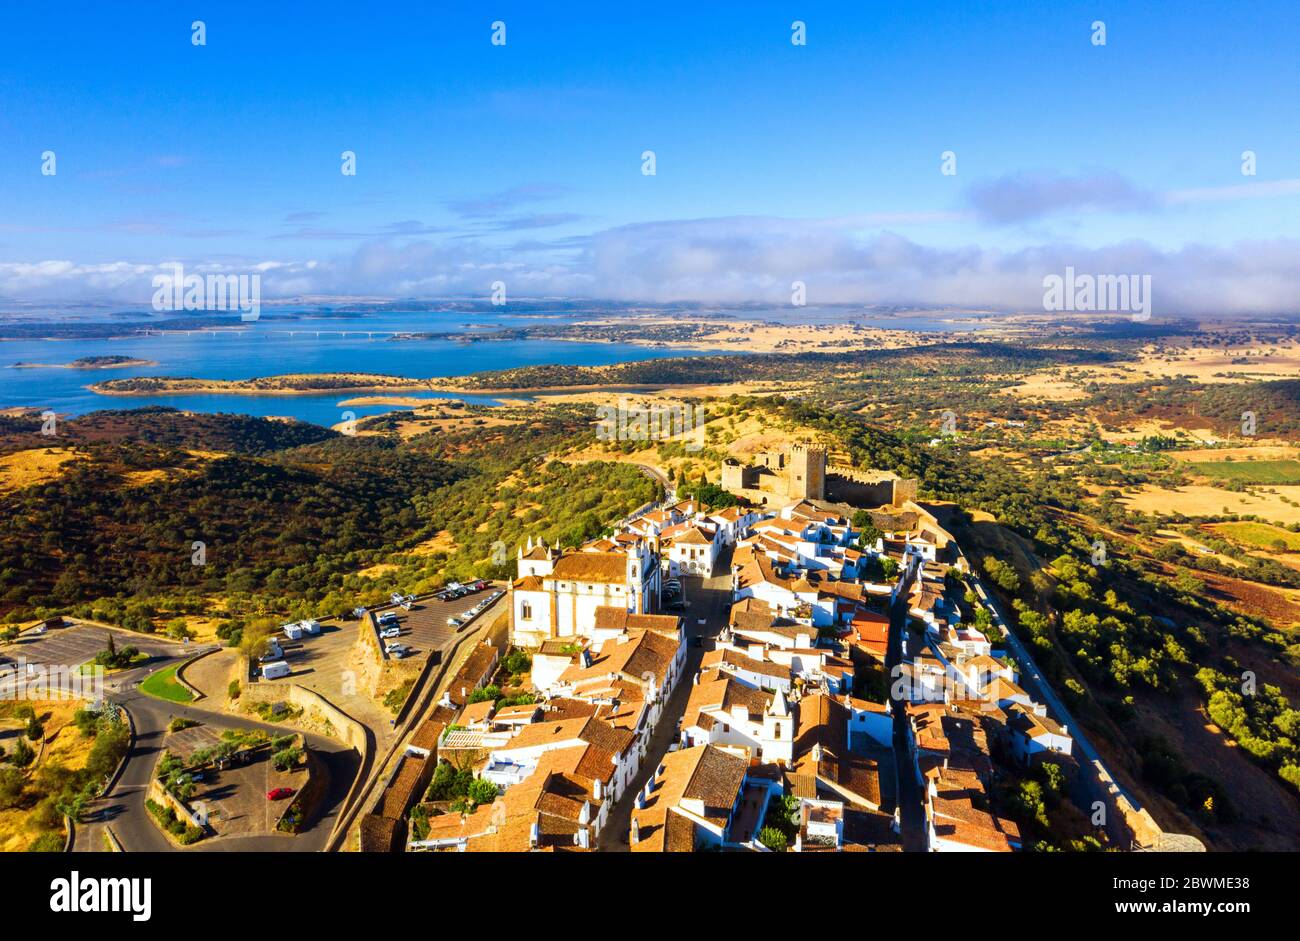 Monsaraz, Portugal. Aerial view of a hstorical town Monsaraz, Portugal with castle and old buildings. Landscape at the background Stock Photo